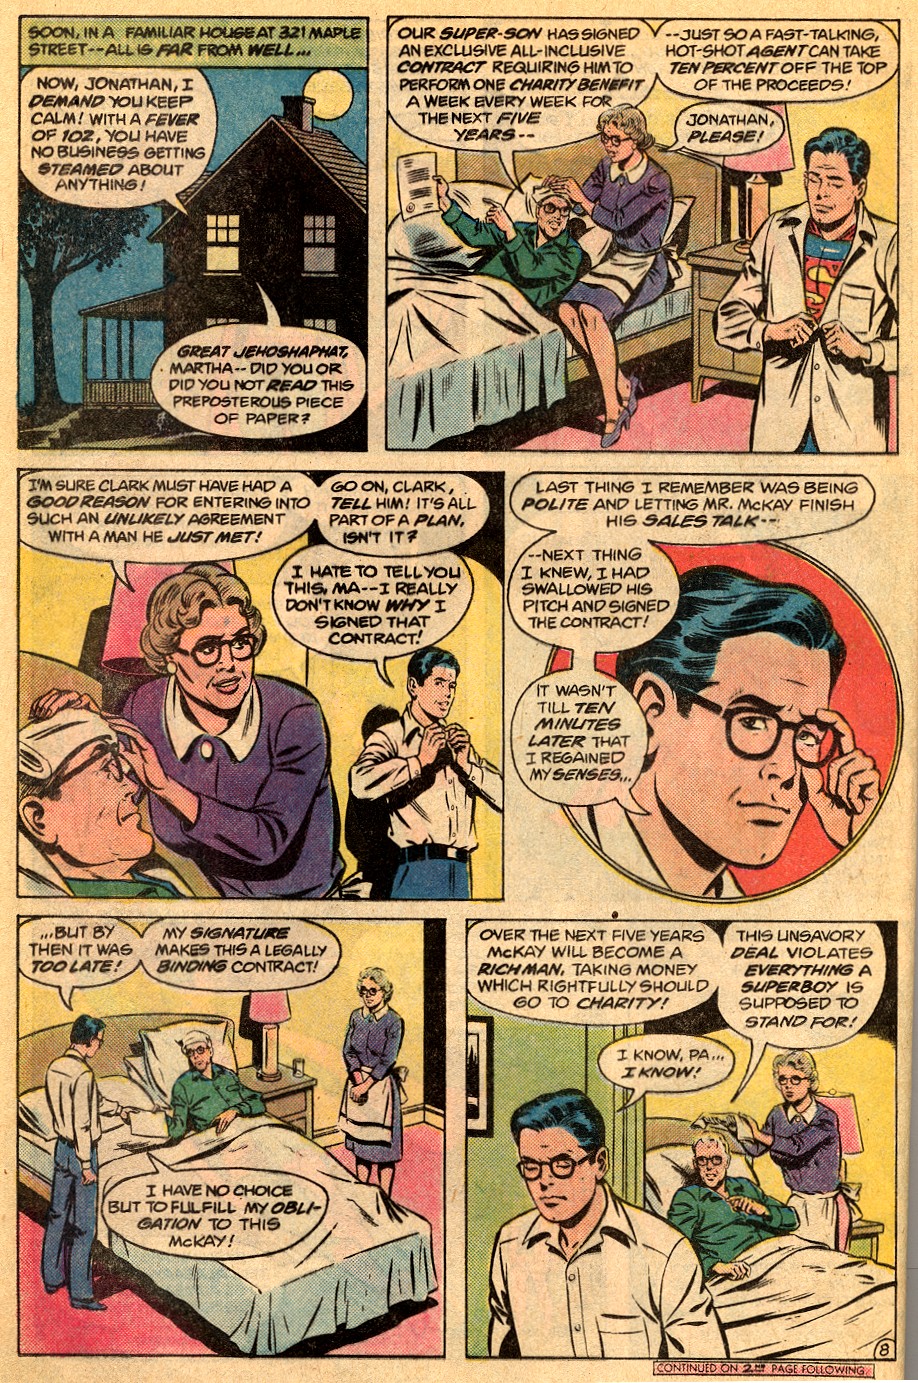 The New Adventures of Superboy 21 Page 11